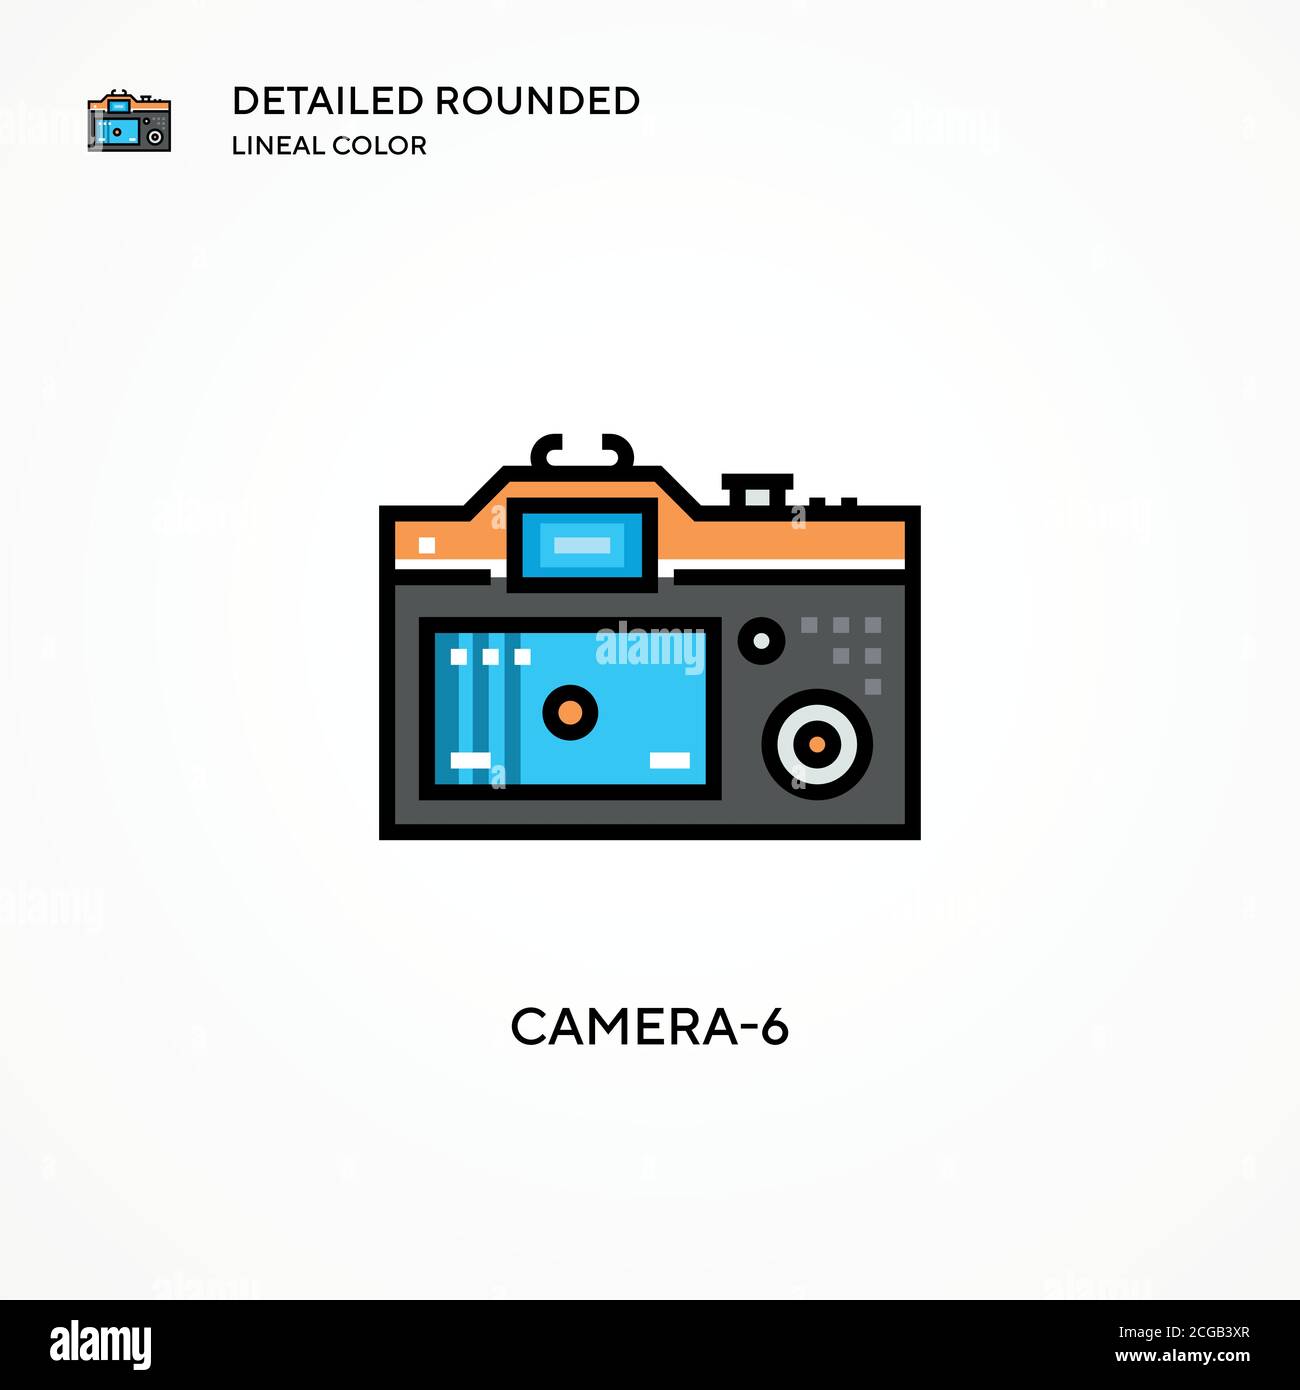 Camera-6 vector icon. Modern vector illustration concepts. Easy to edit and customize. Stock Vector